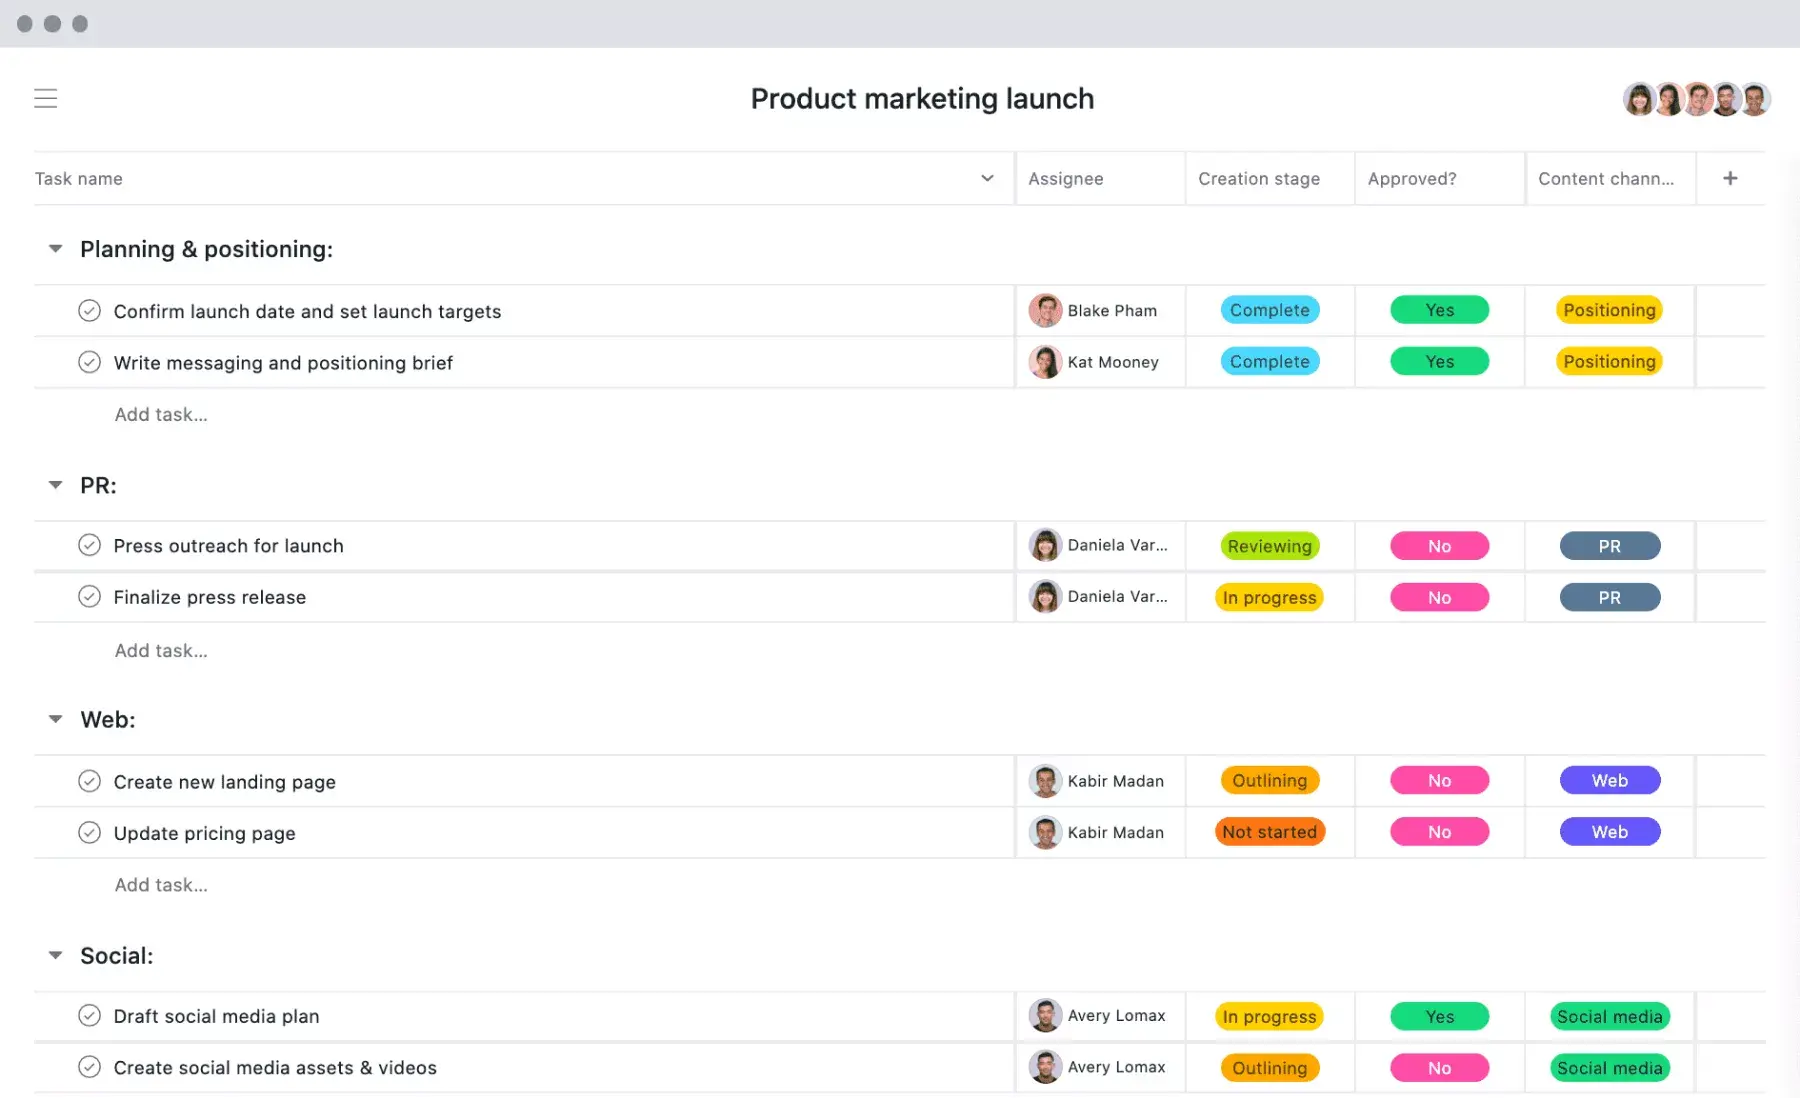 [Old Product UI] Product marketing launch project in Asana, spreadsheet-style view with project deliverables (Lists)